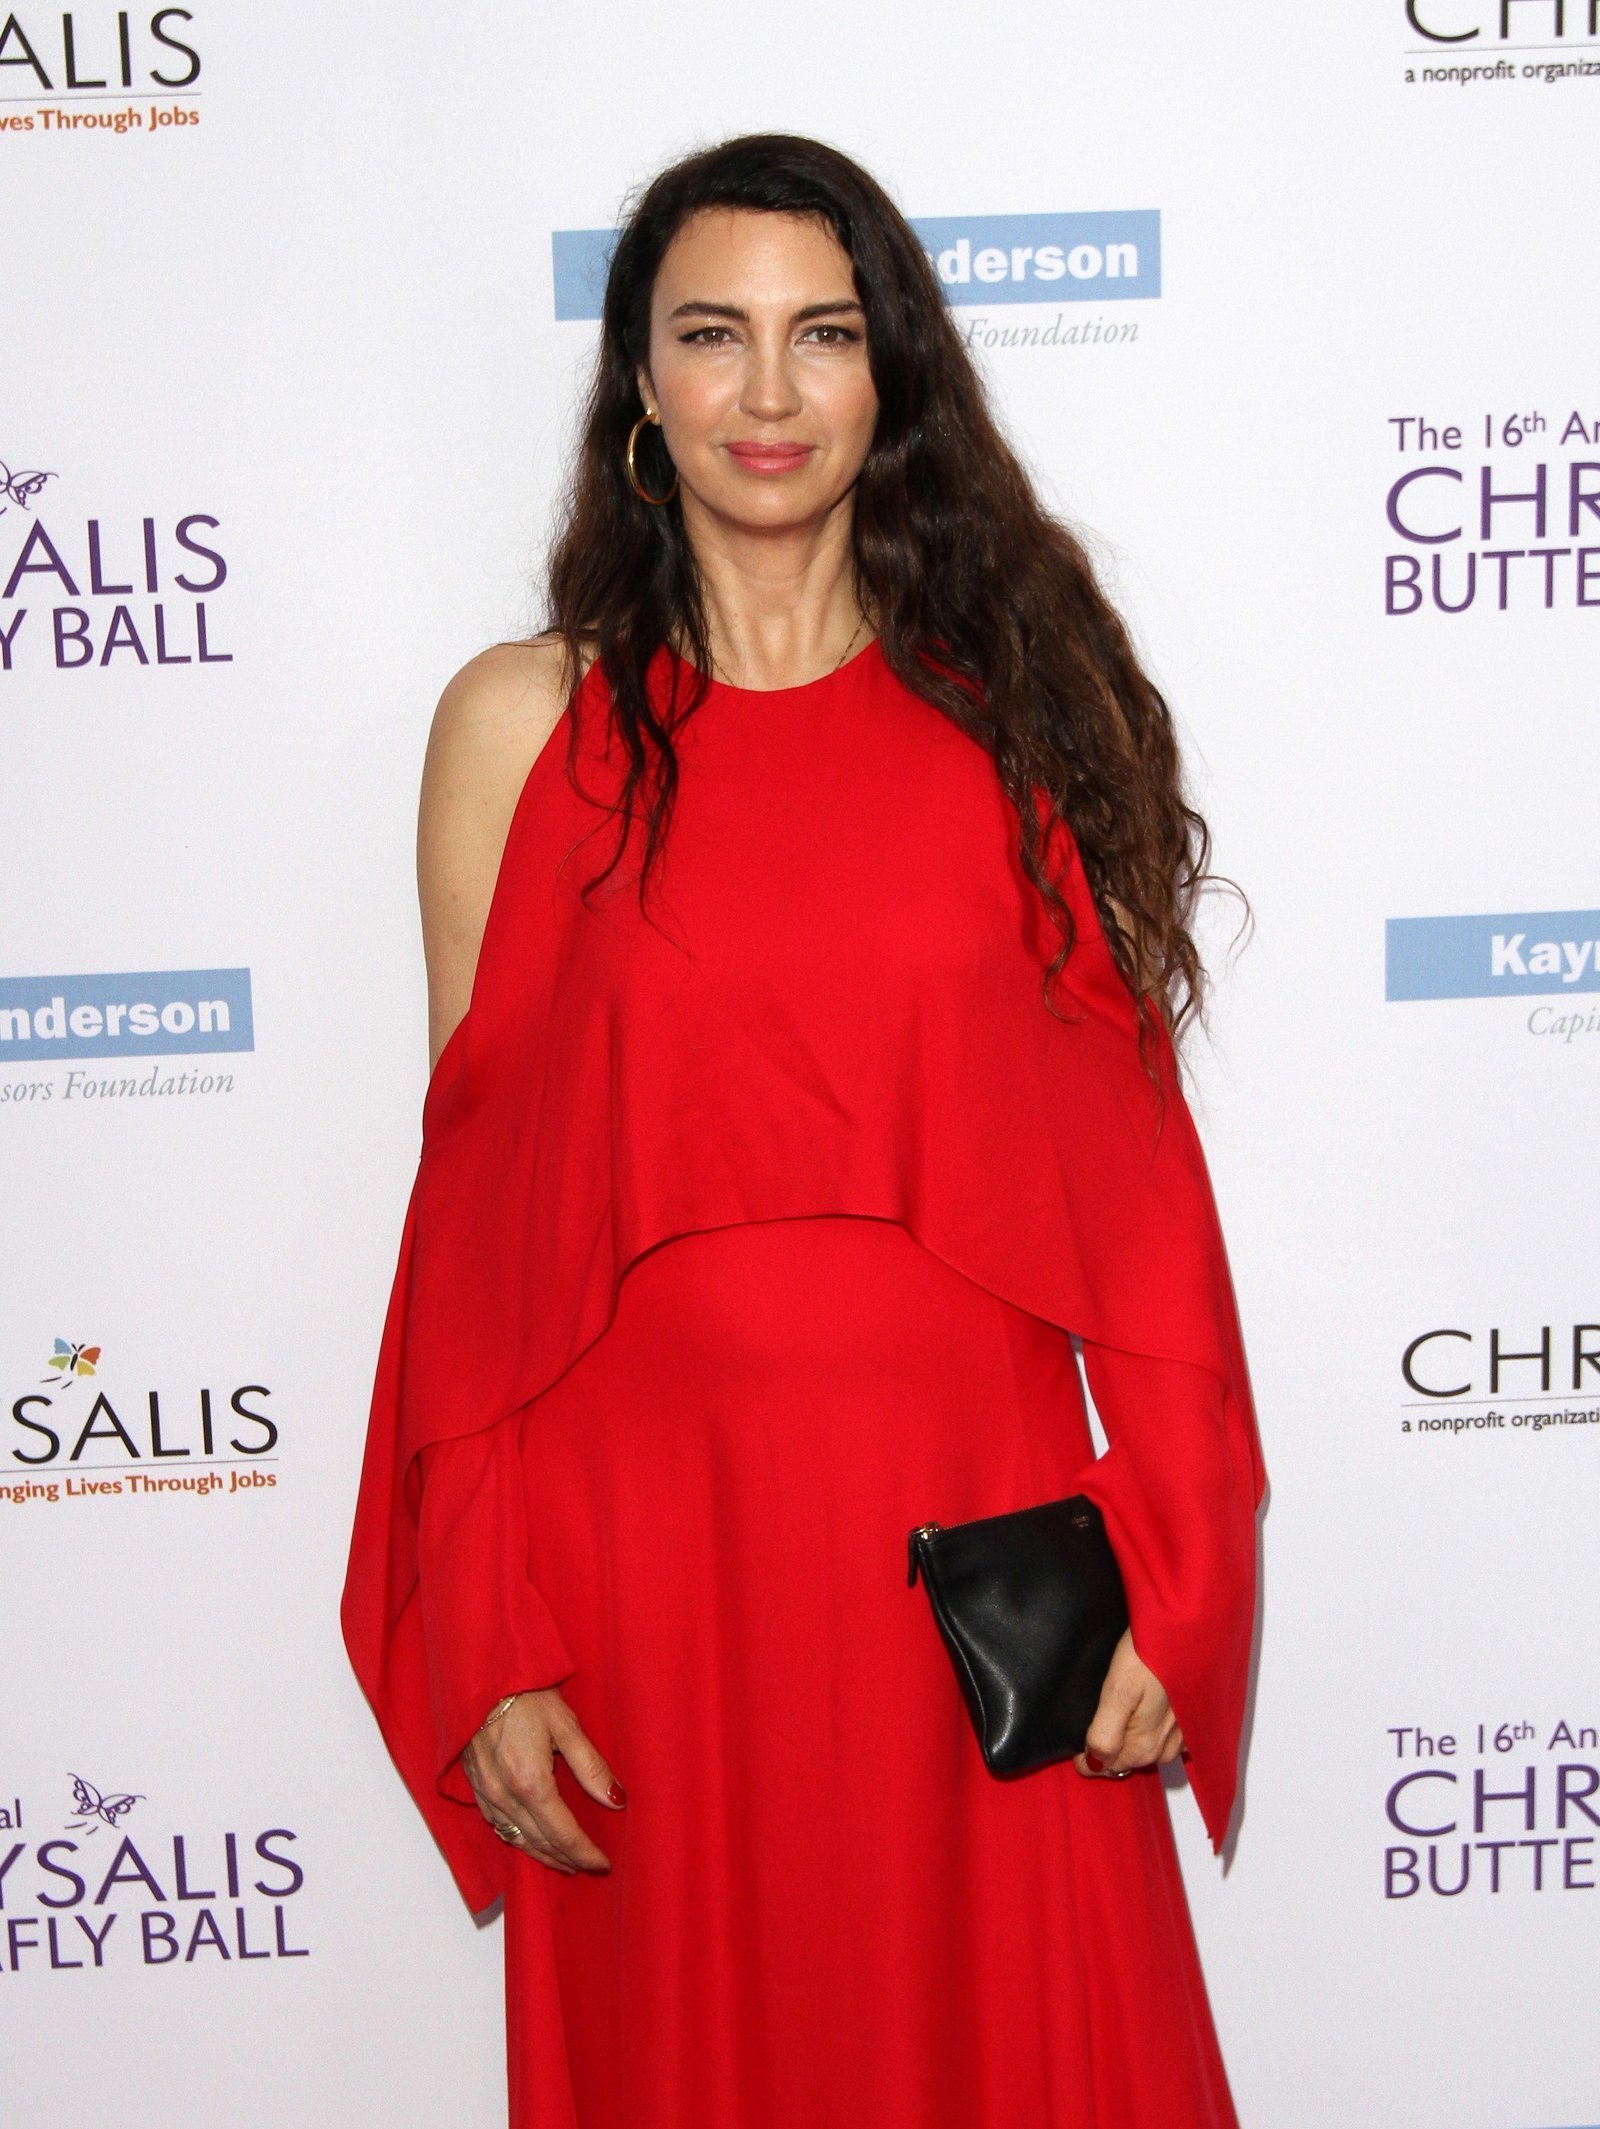 Shiva Rose - 16th Annual Chrysalis Butterfly Ball - Arrivals | Picture 1502692